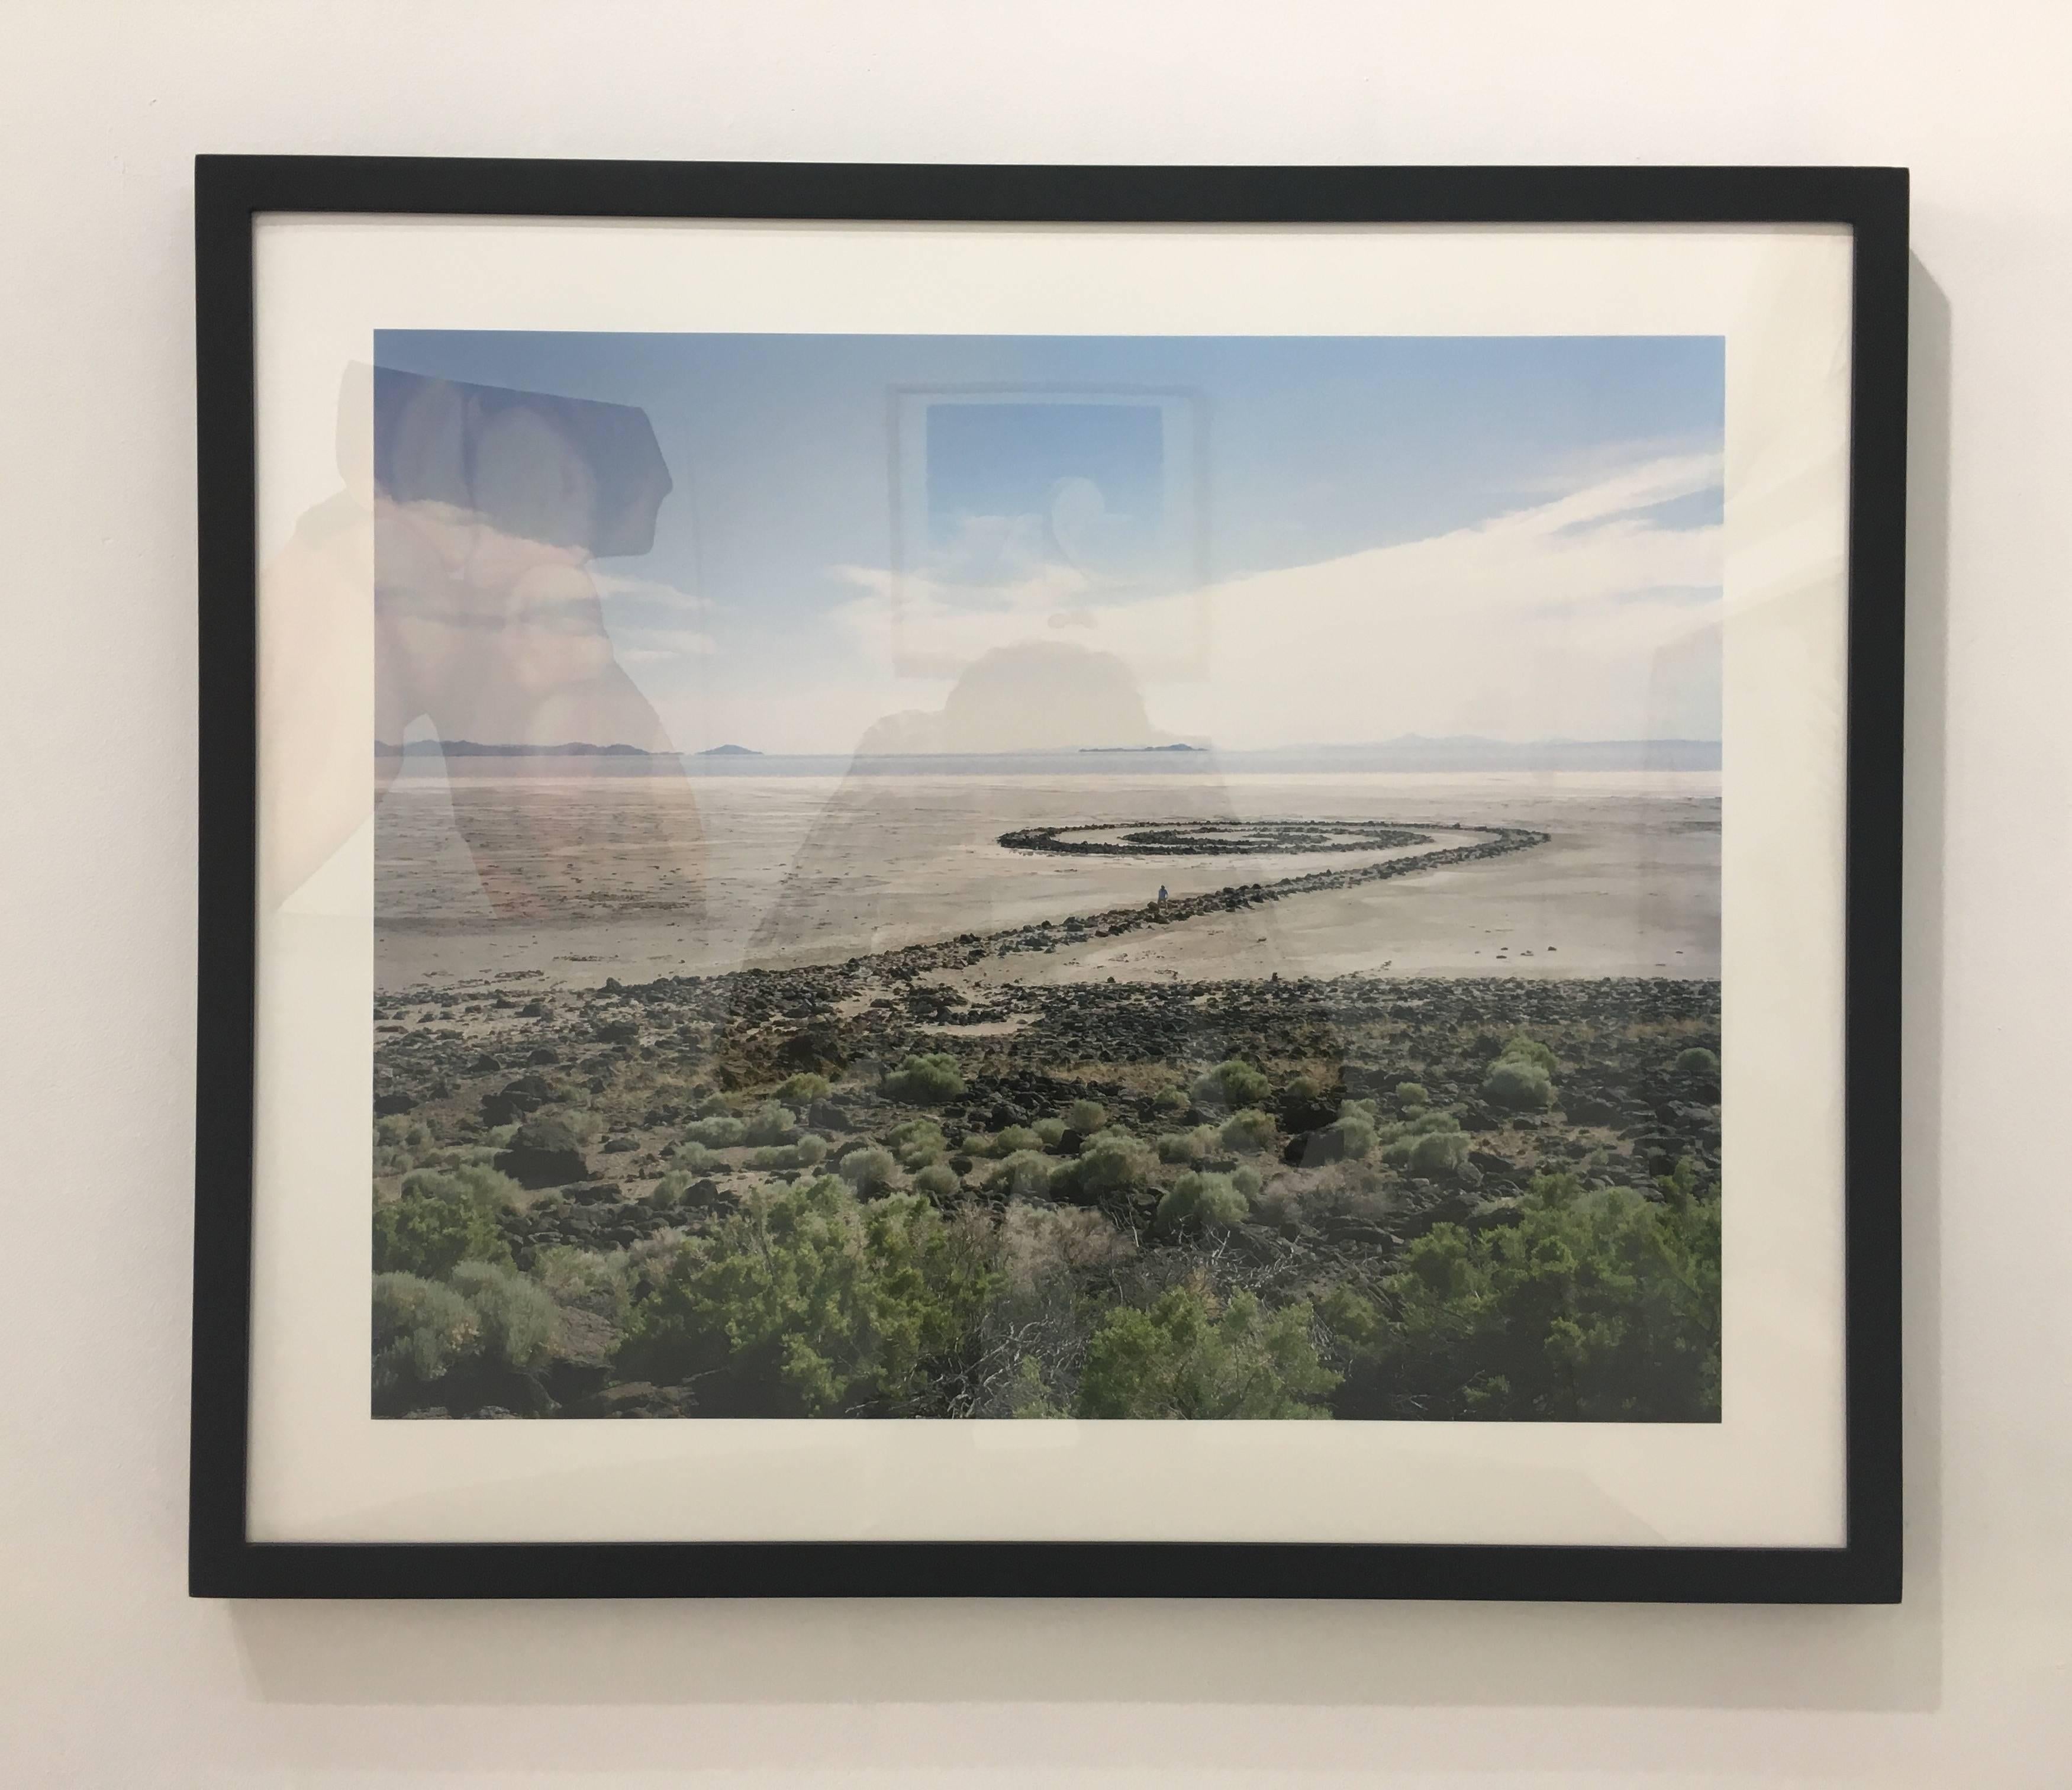 Spiral Jetty - Photograph by Edie Winograde